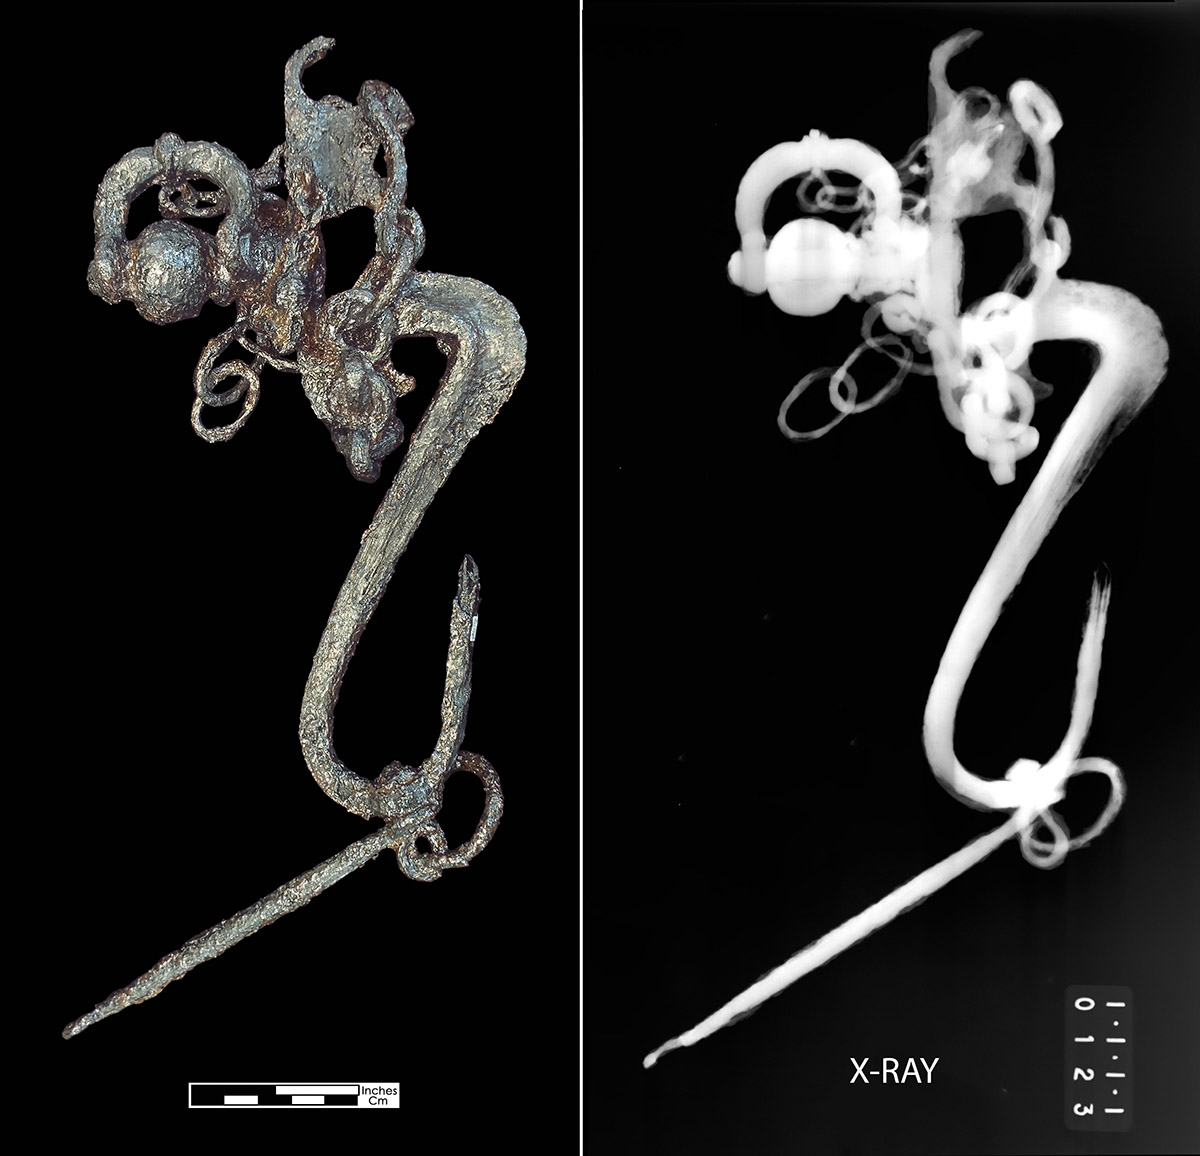 An X-ray of the horse bit taken at the Maryland Archaeological Conservation (MAC) lab. Denser metal appears brighter in the X-ray image.